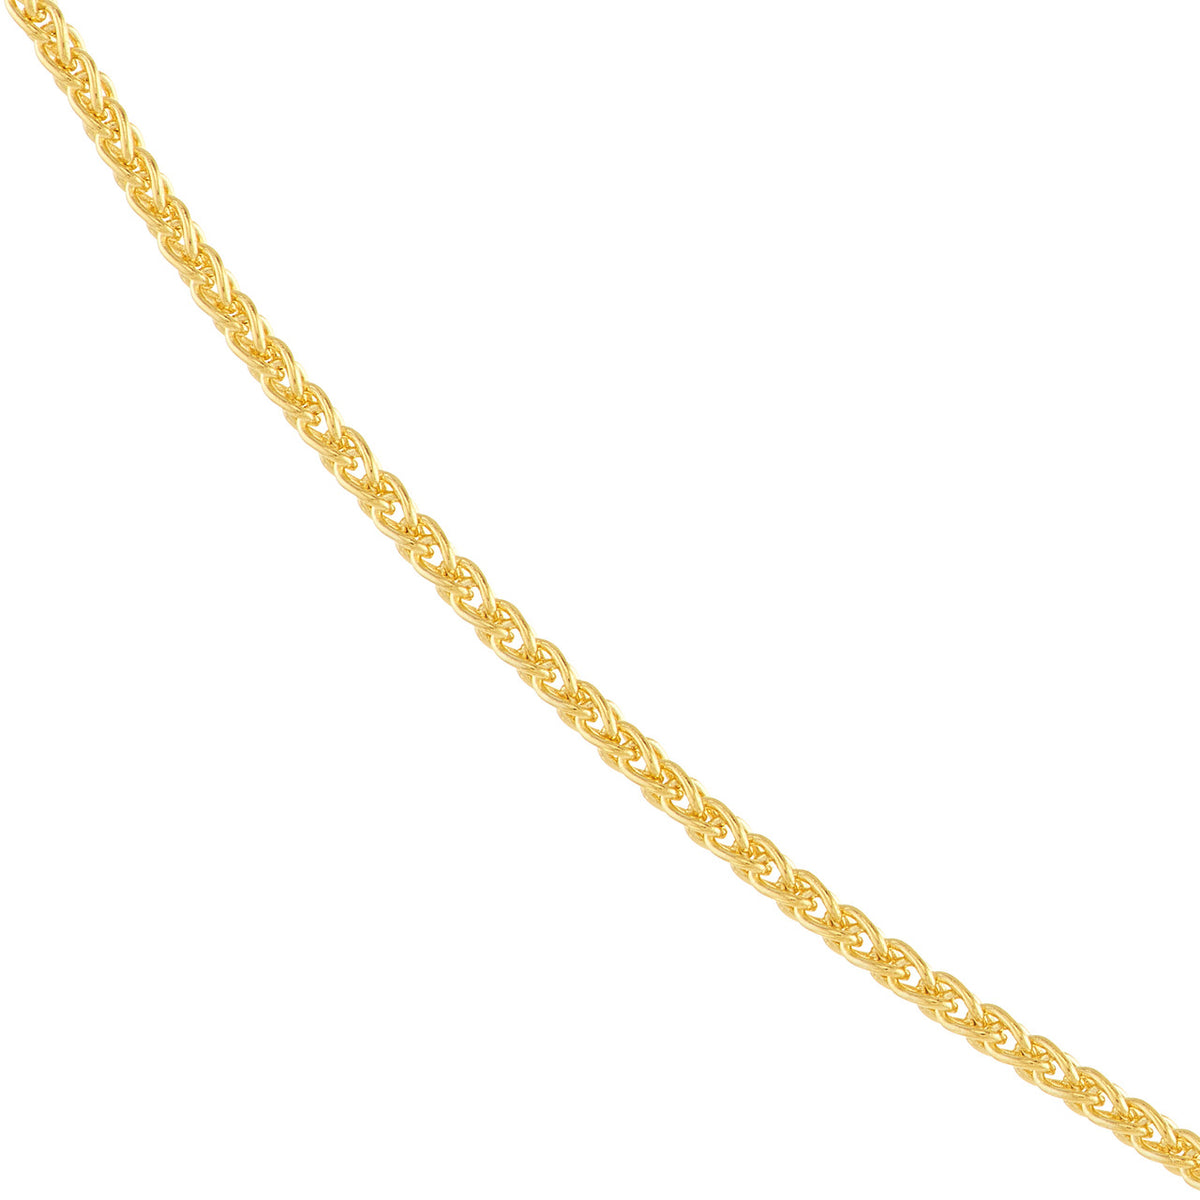 14K Yellow Gold or White Gold 0.85mm Wheat Chain Necklace with Lobster Lock